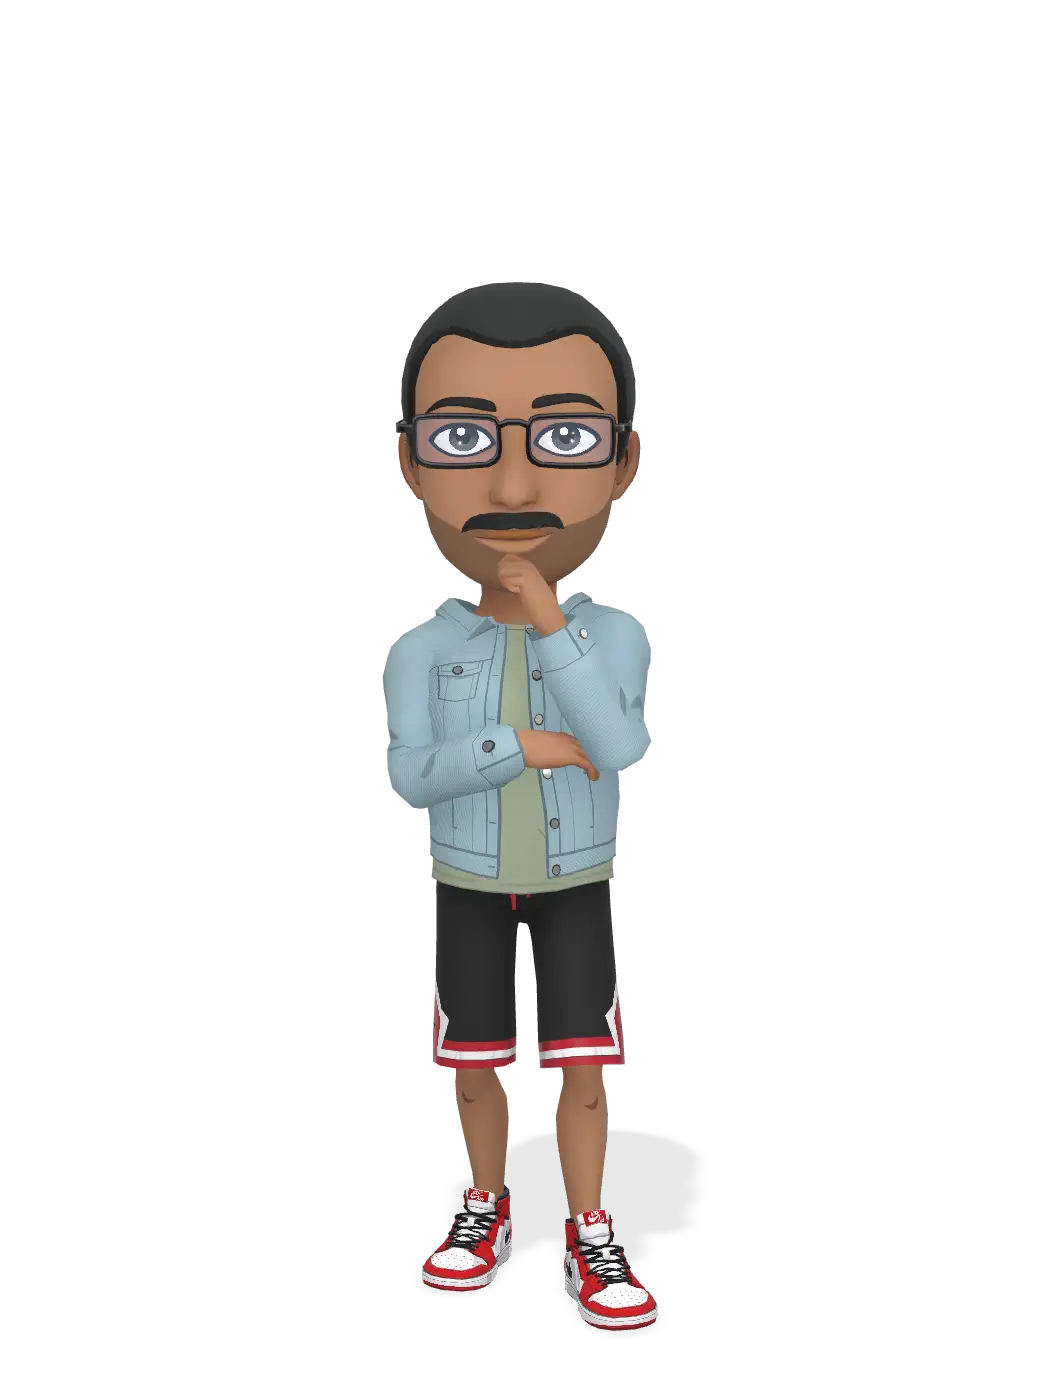 3D Bitmoji for mike_support